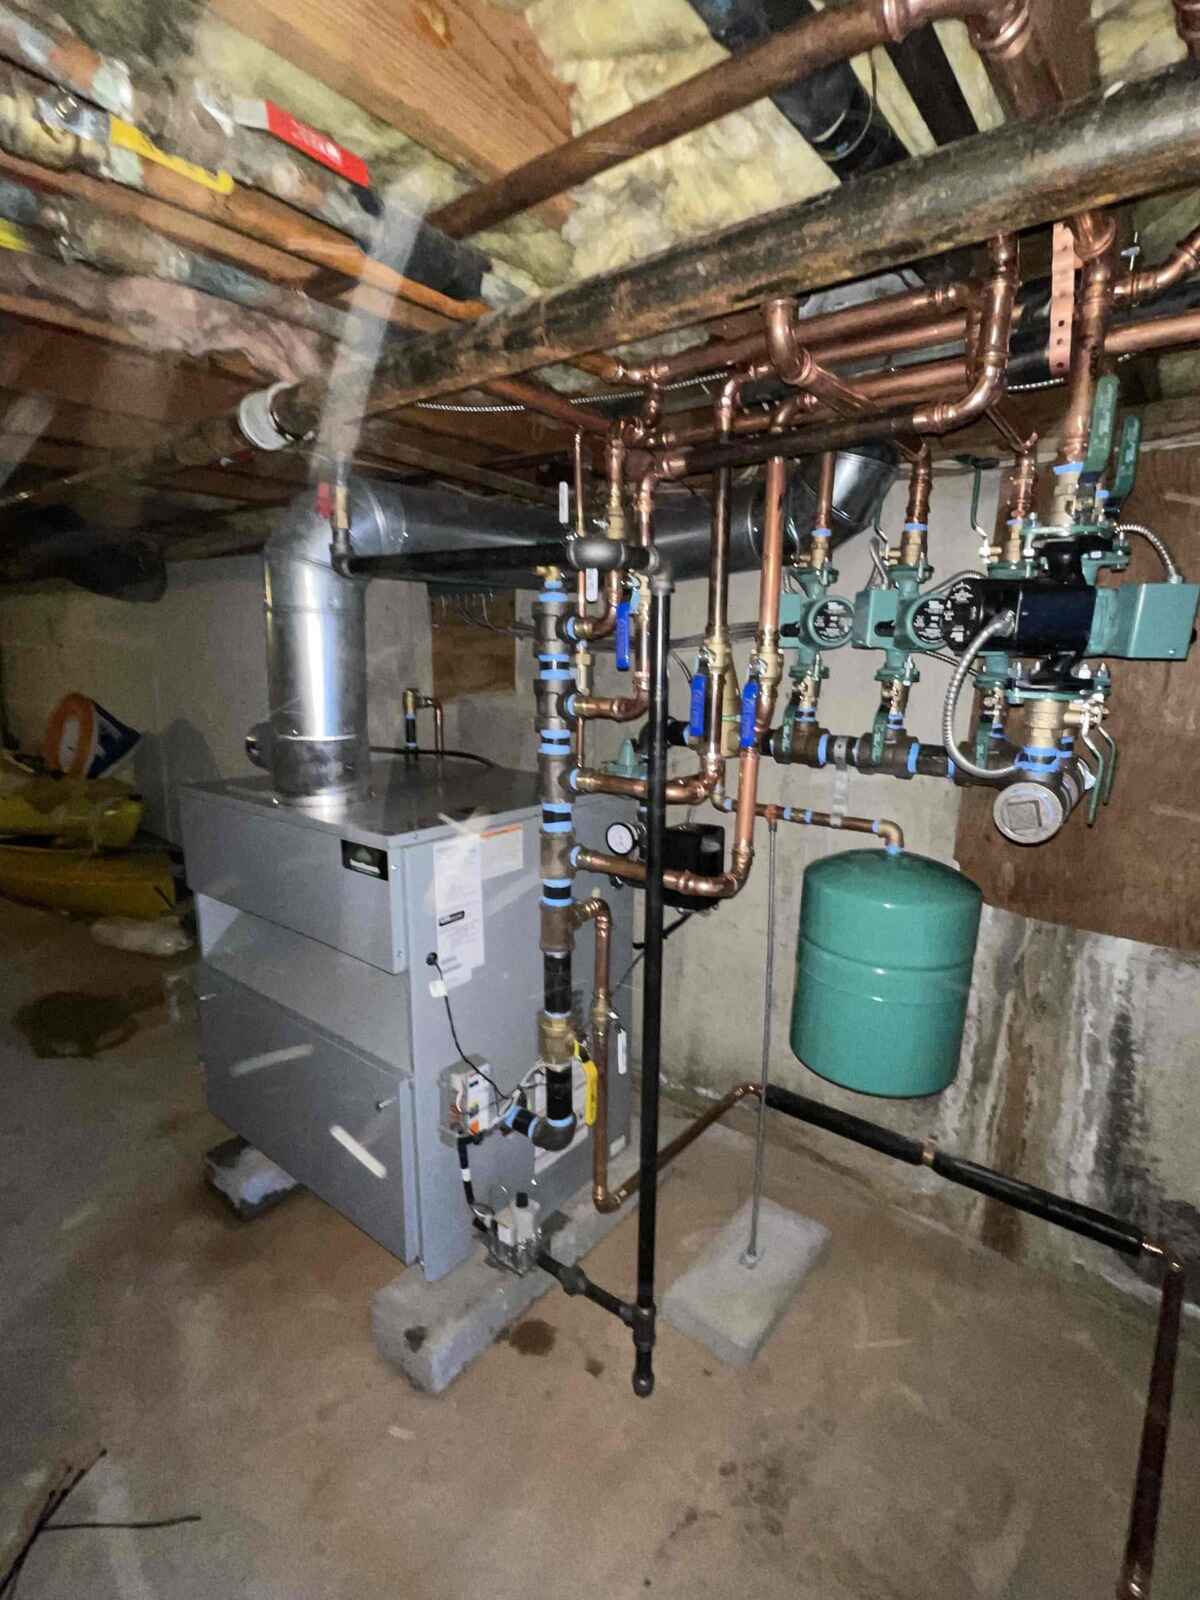 New boiler system in a basement